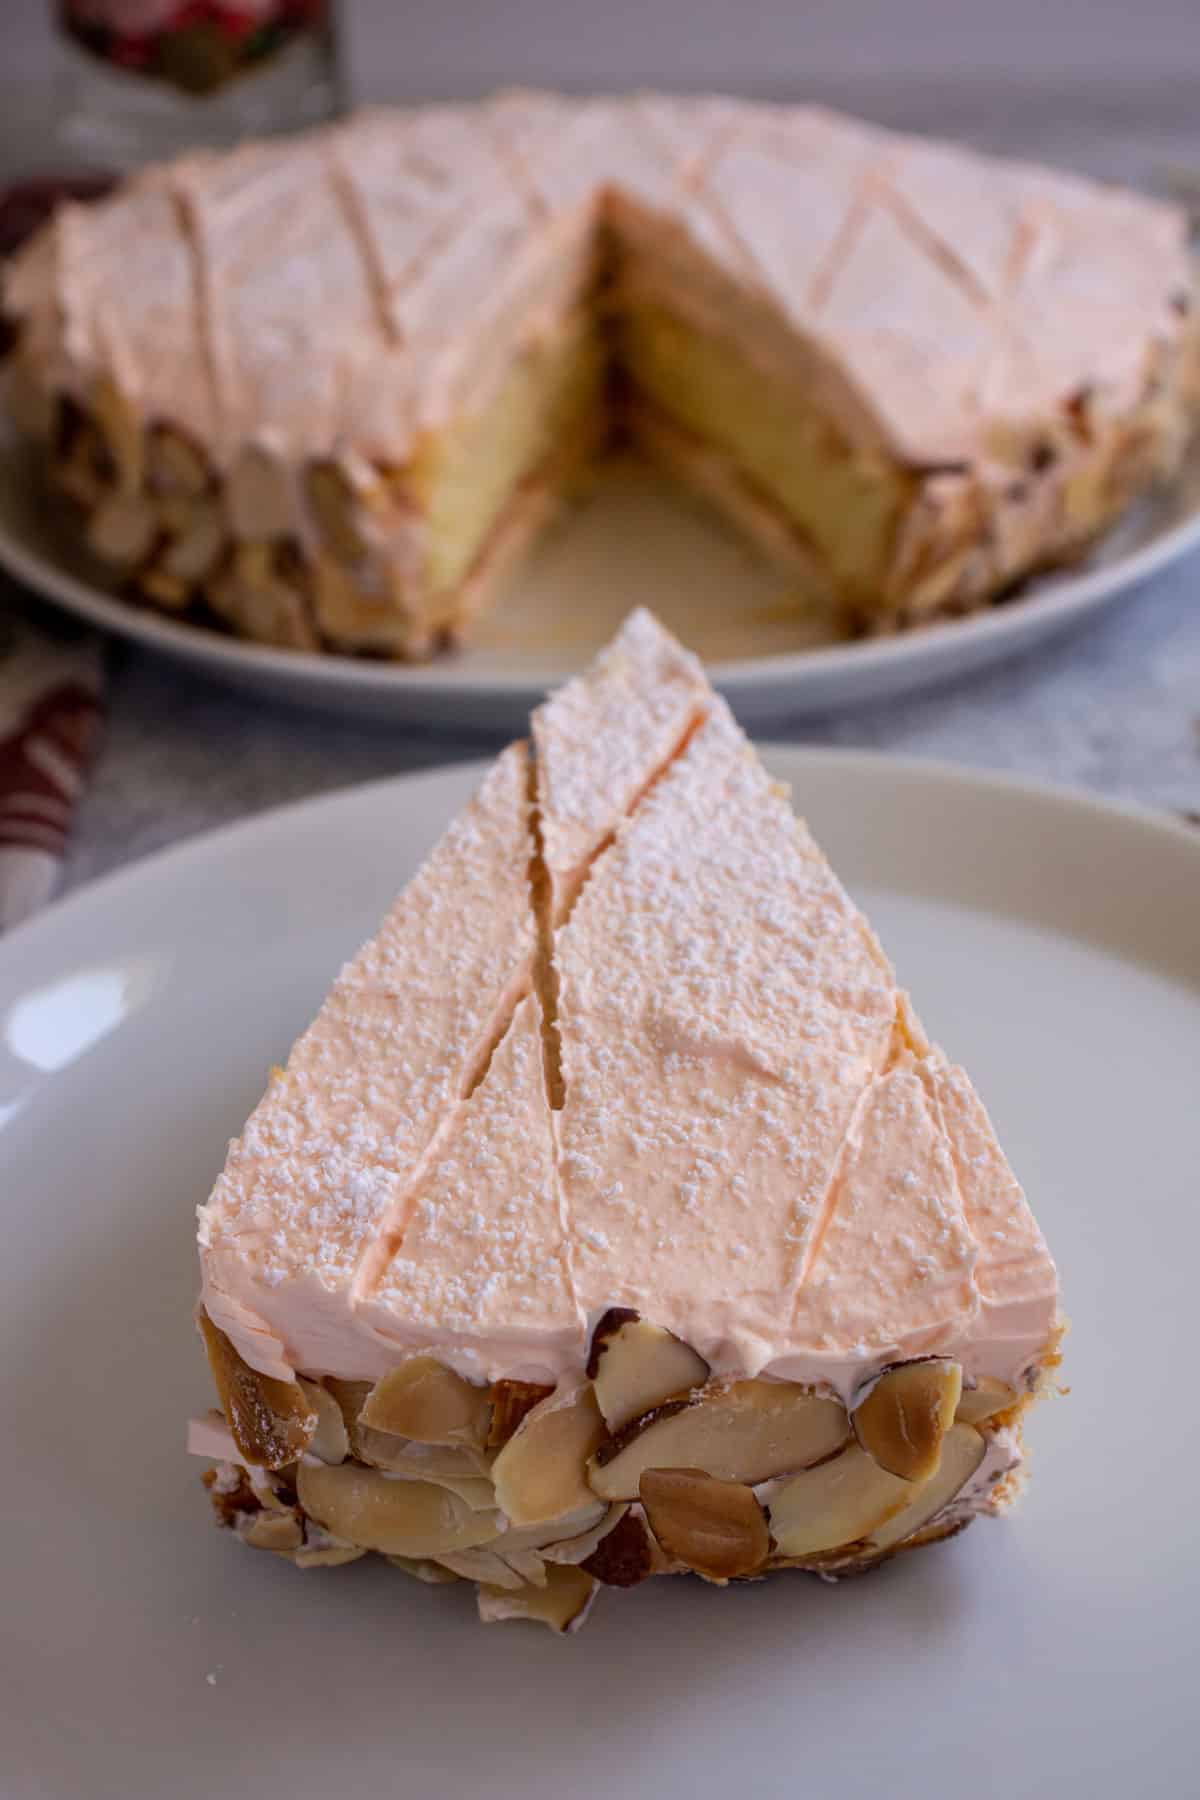 A slice of cake with sliced almonds along the edge served on a white plate.